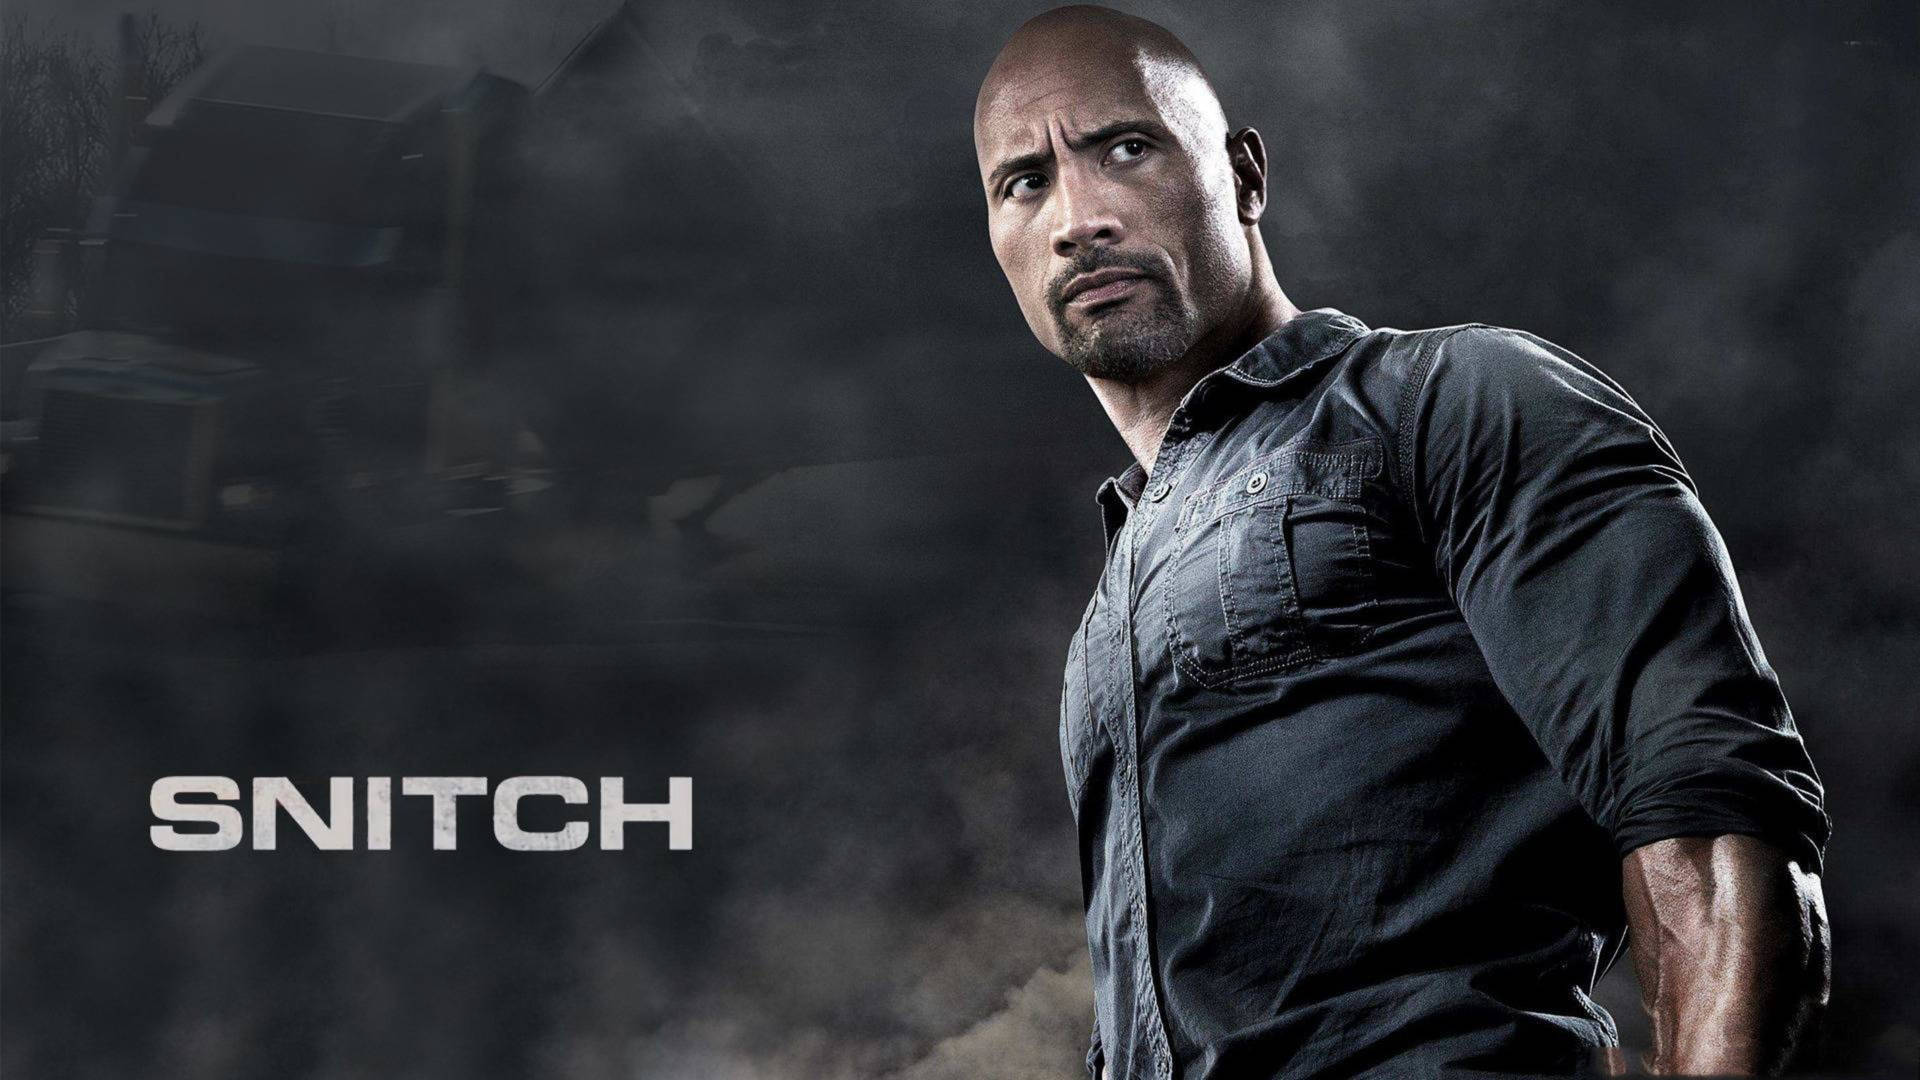 Dwayne Johnson Powerfully Intense In Snitch Movie Poster. Background